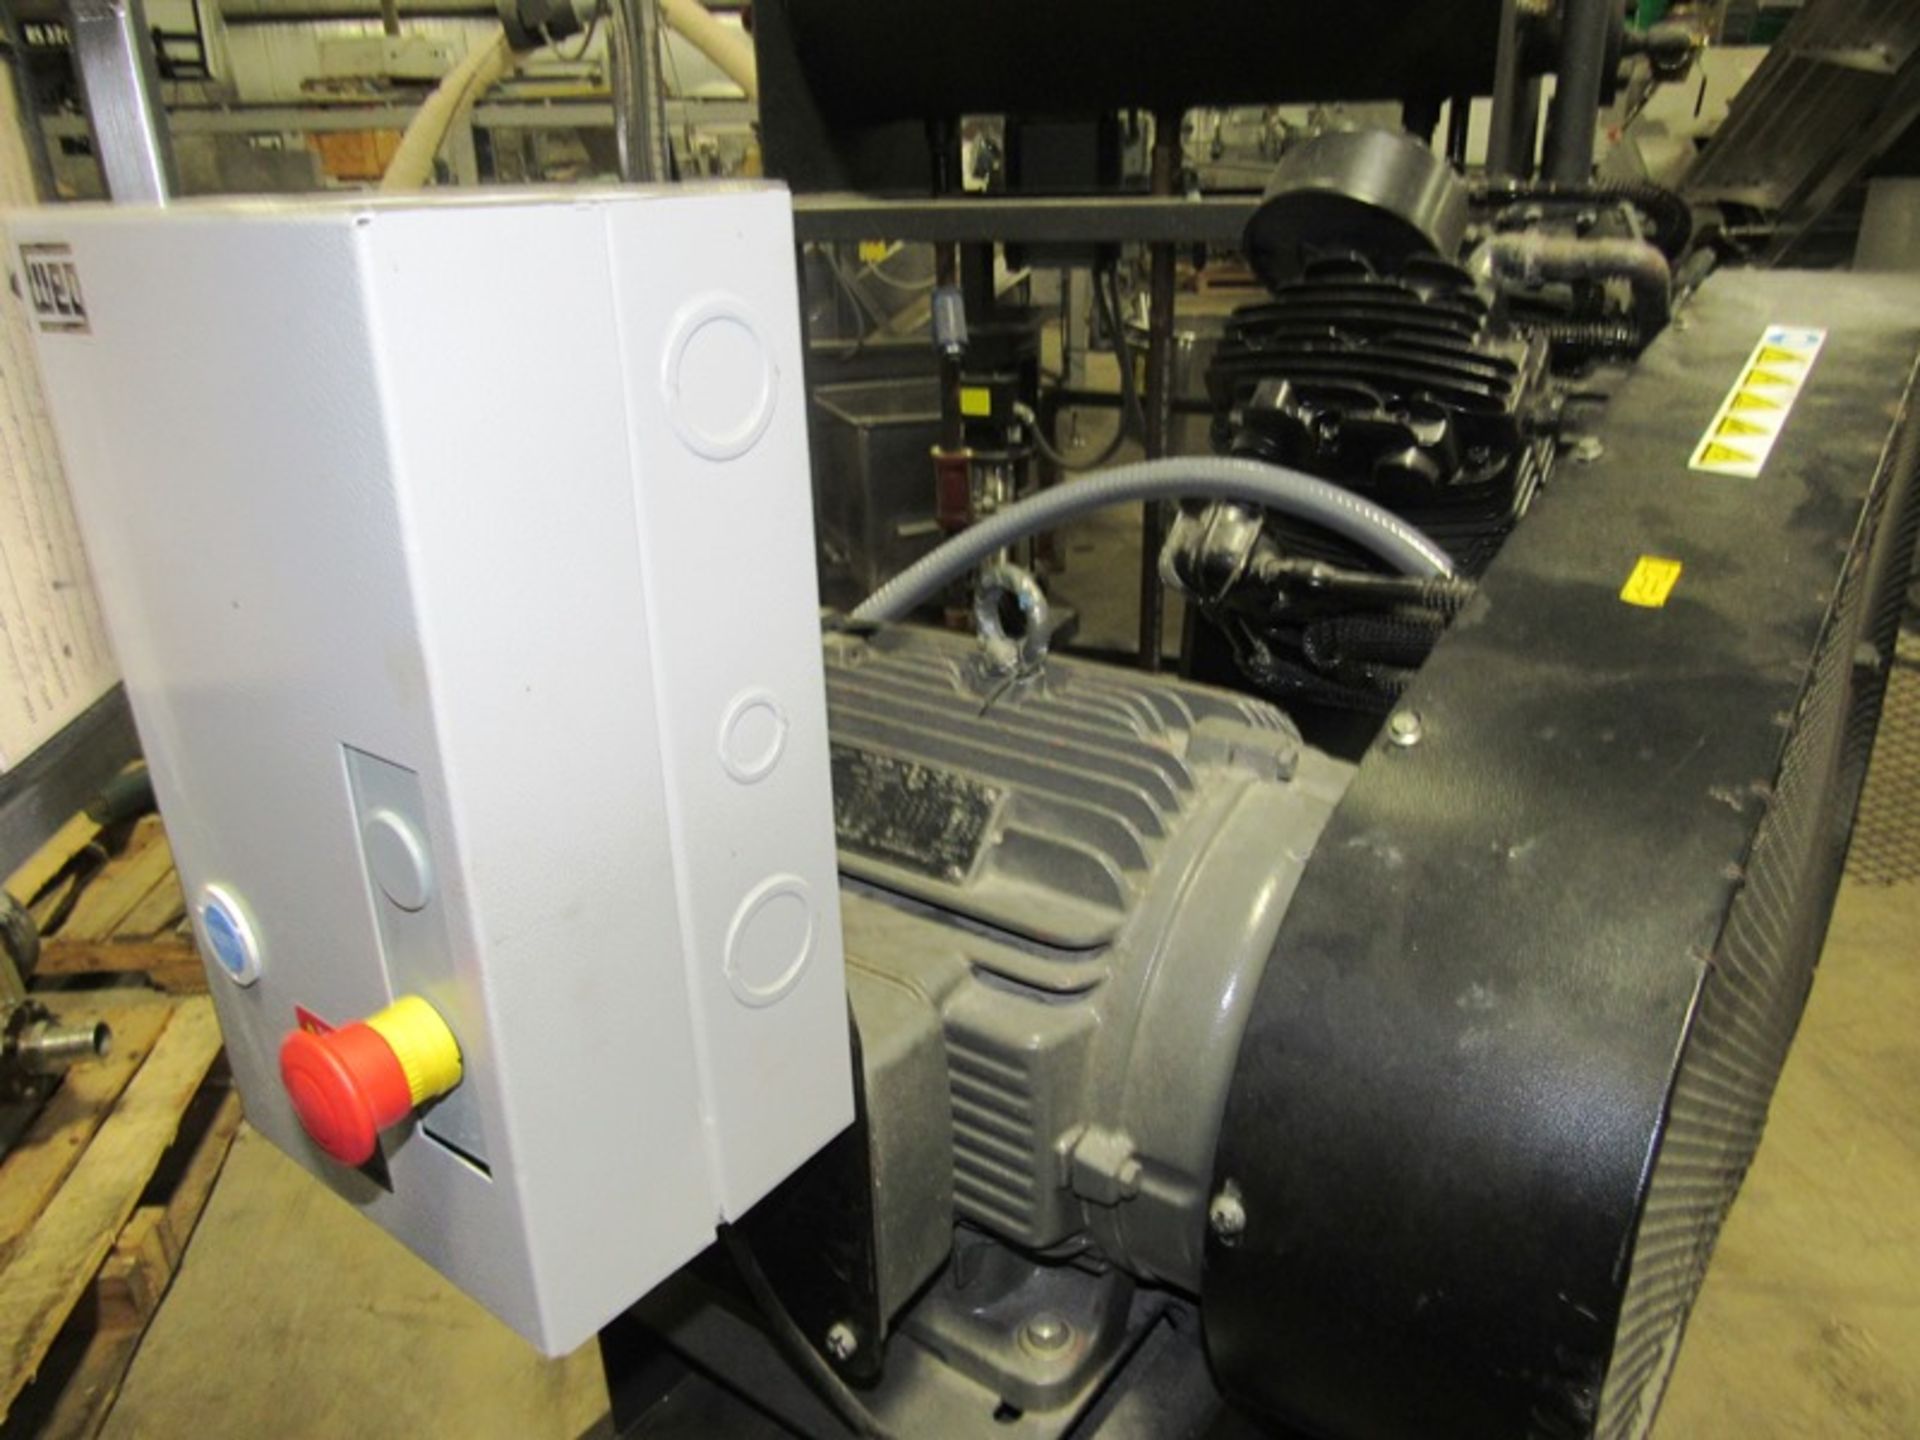 Schulz Mdl. 80BR 2 Stage Air Compressor, 15 h.p., 208/230/460 volts, 3 phase, on holding tank - Image 4 of 7